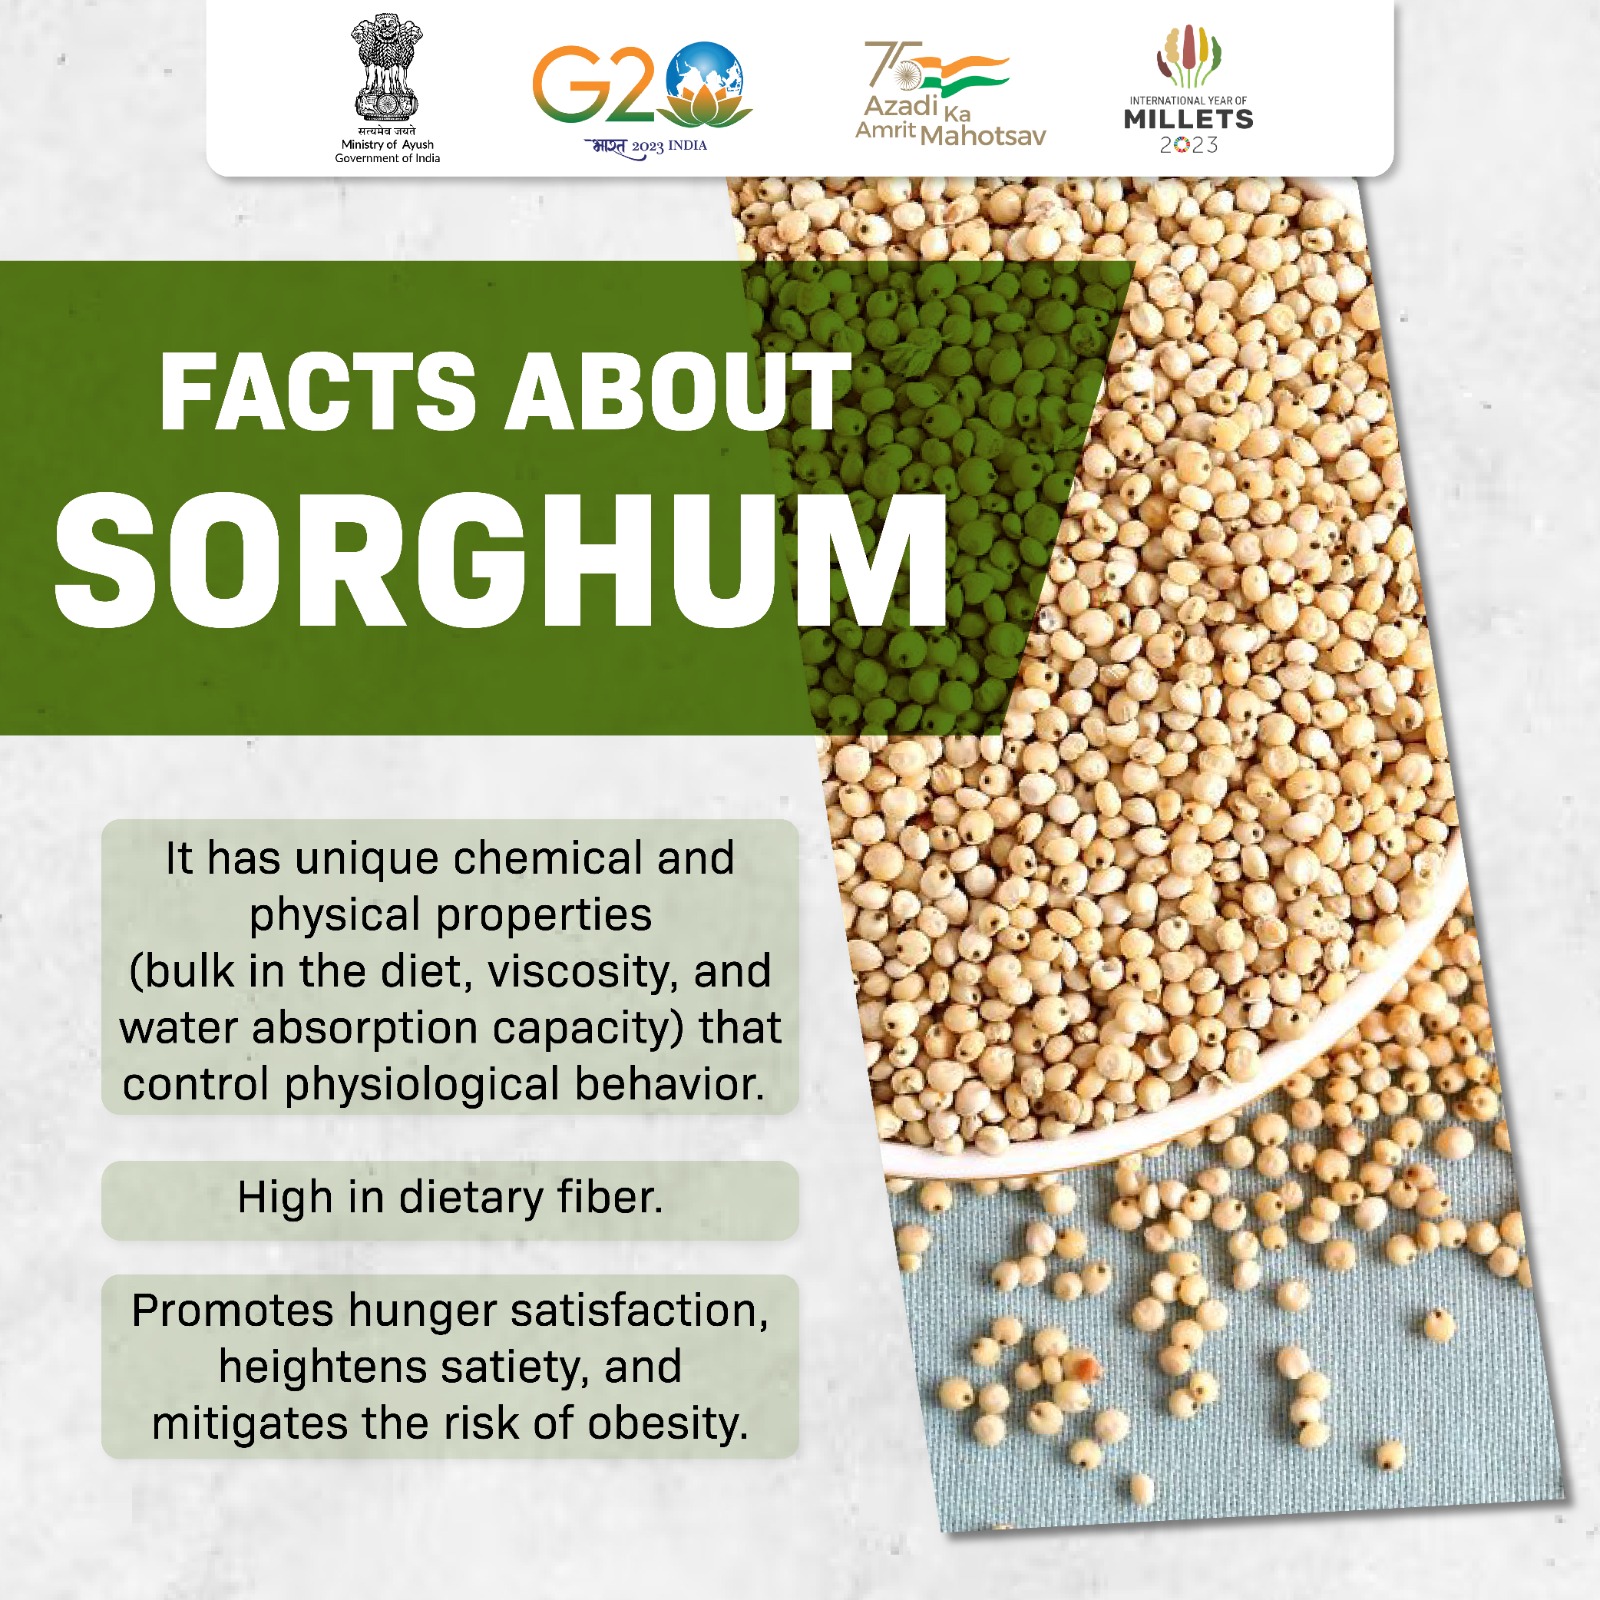 Facts about sorghum.